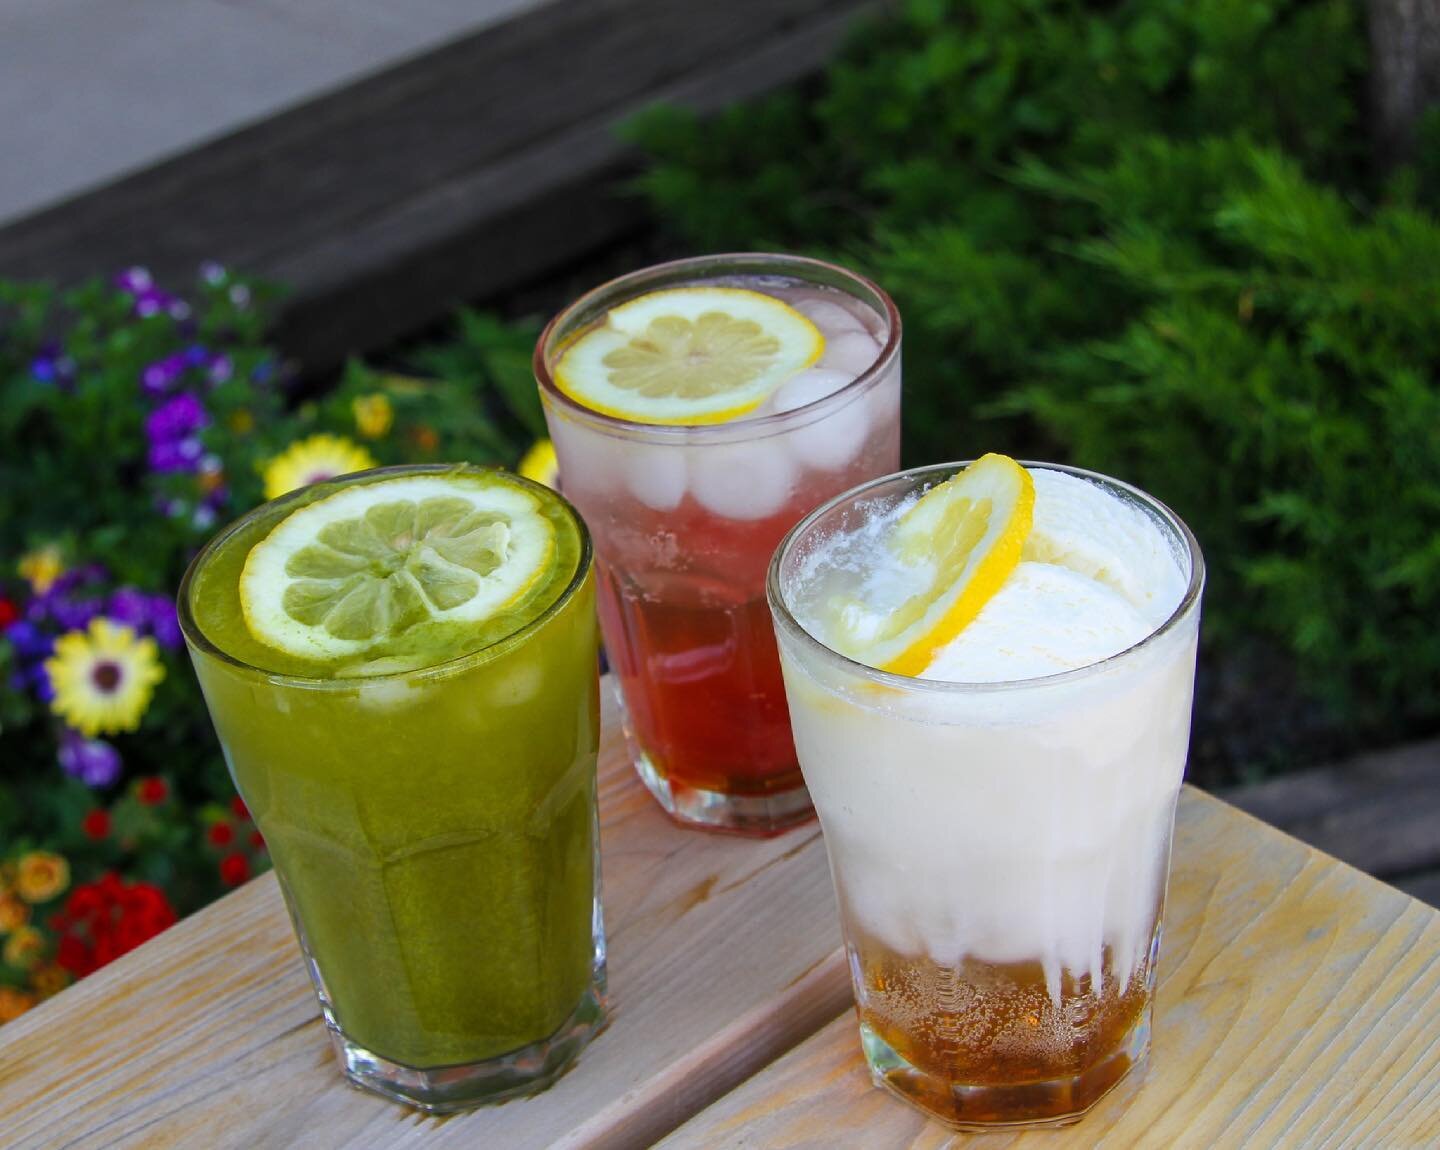 Holy heat wave! As we roll into this unbelievably hot weather, we&rsquo;re adding some new icy cool drinks to the menu! ⁣
.

Say hello to our new friends: Sparkling Matcha Lemonade, Cascara Fruit Punch, and the Cascara Float made with our soft serve 